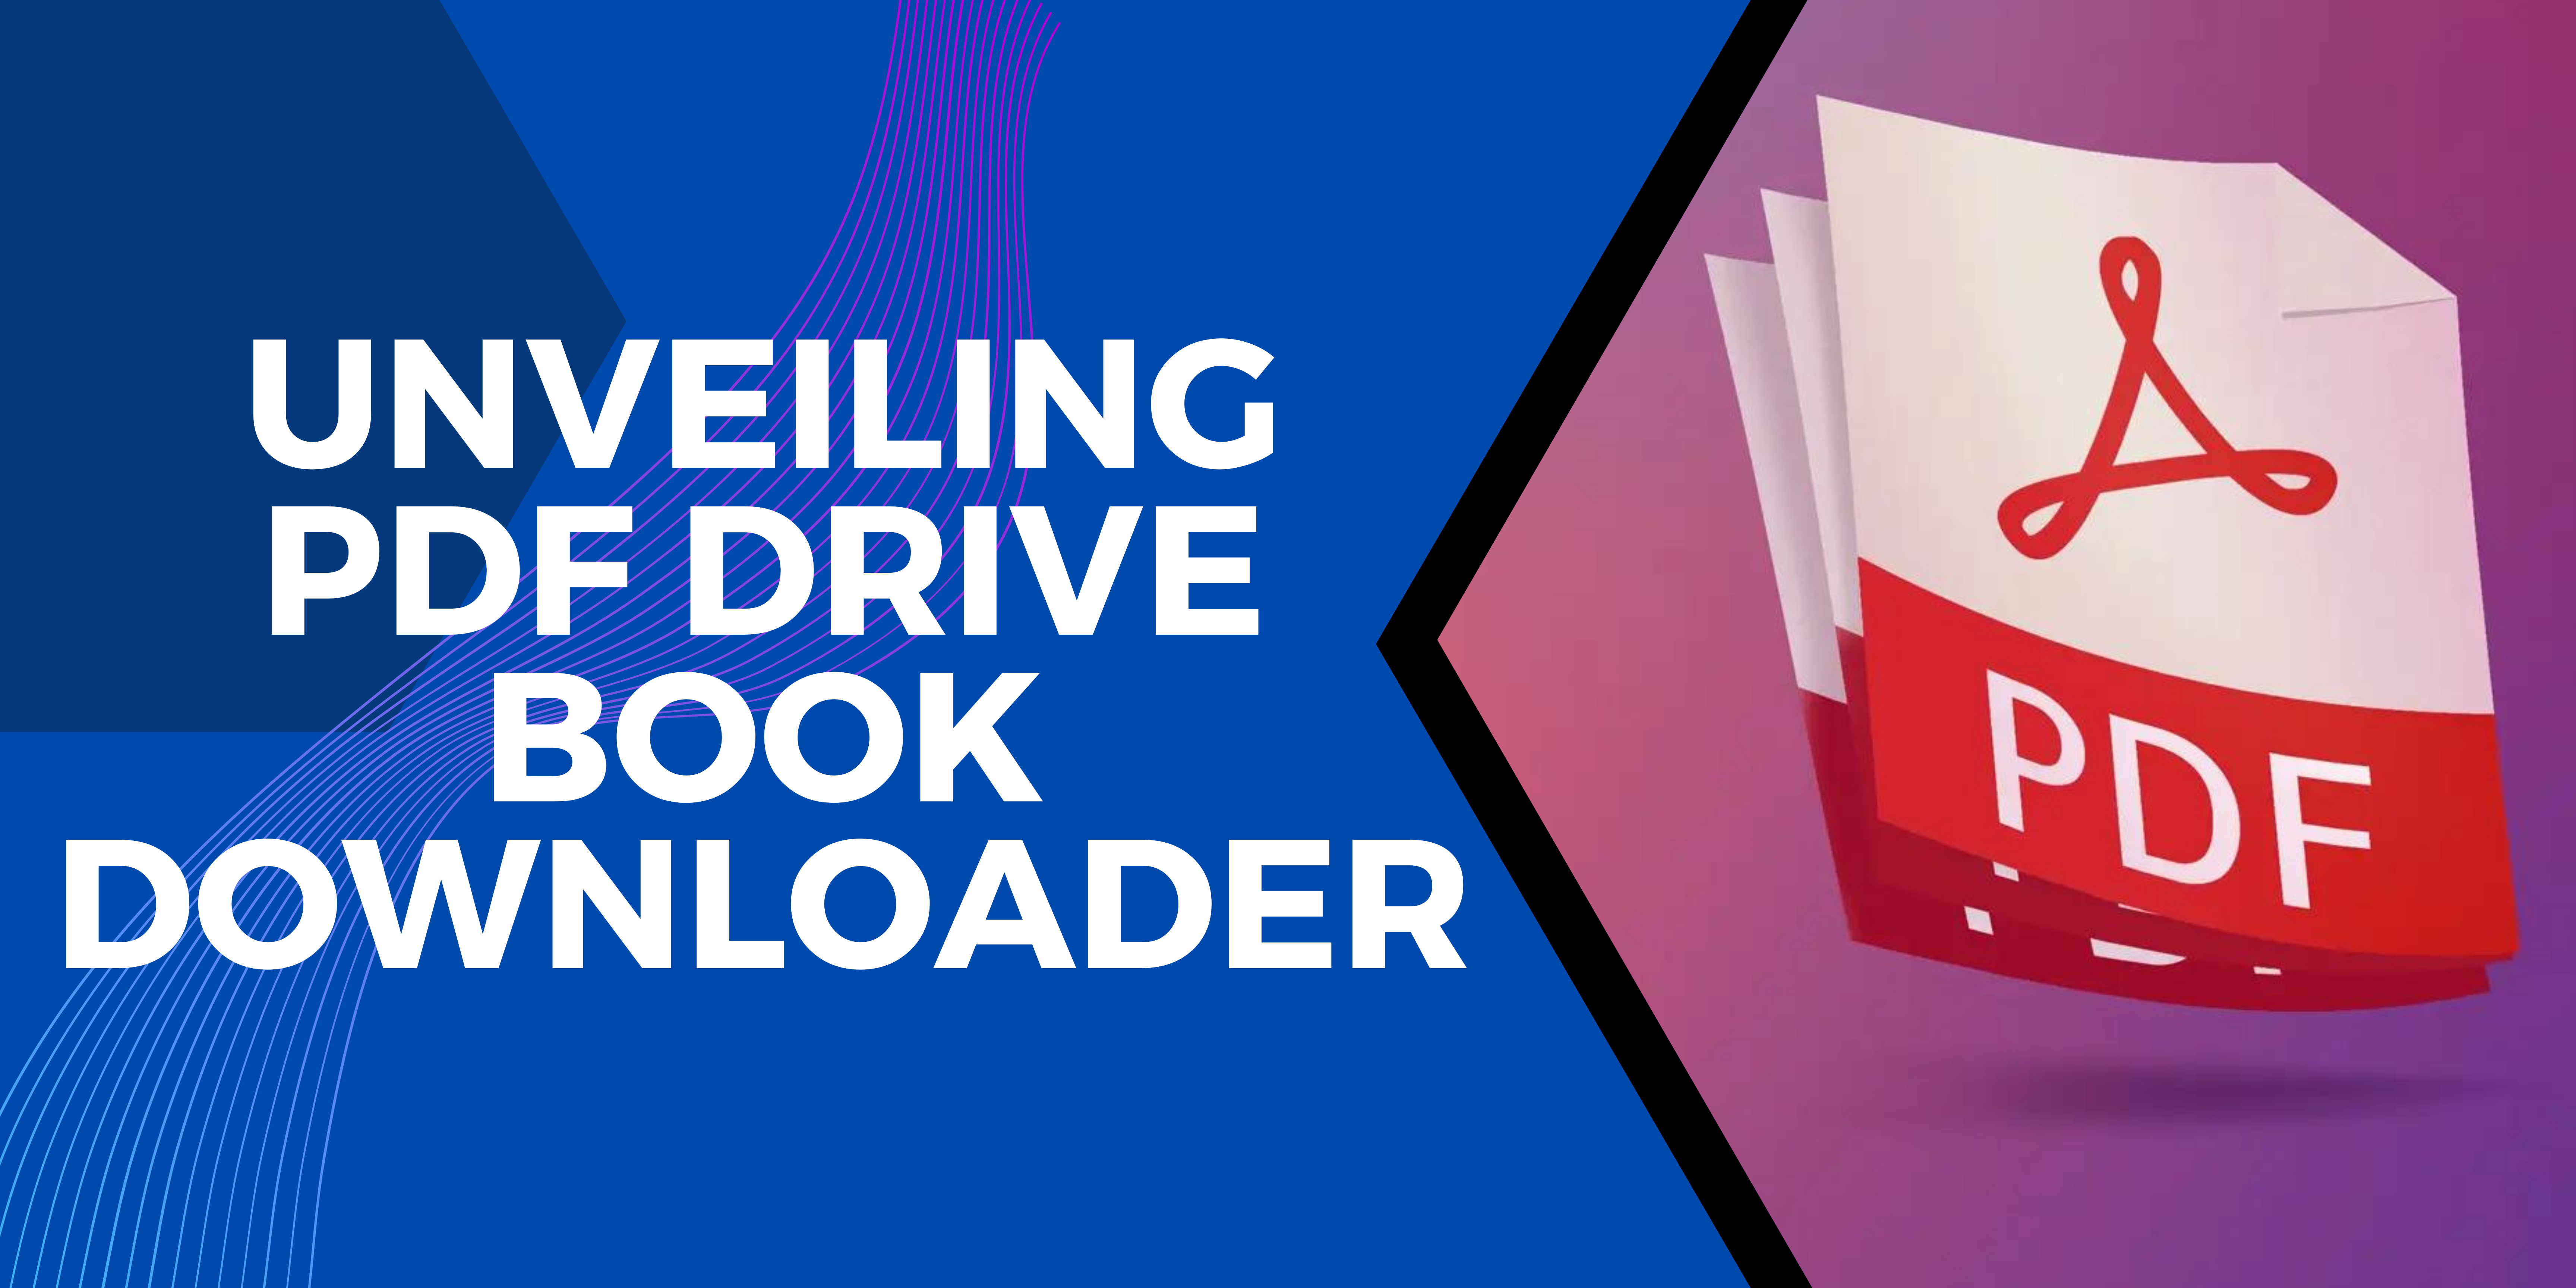 Unveiling PDF Drive Book Downloader